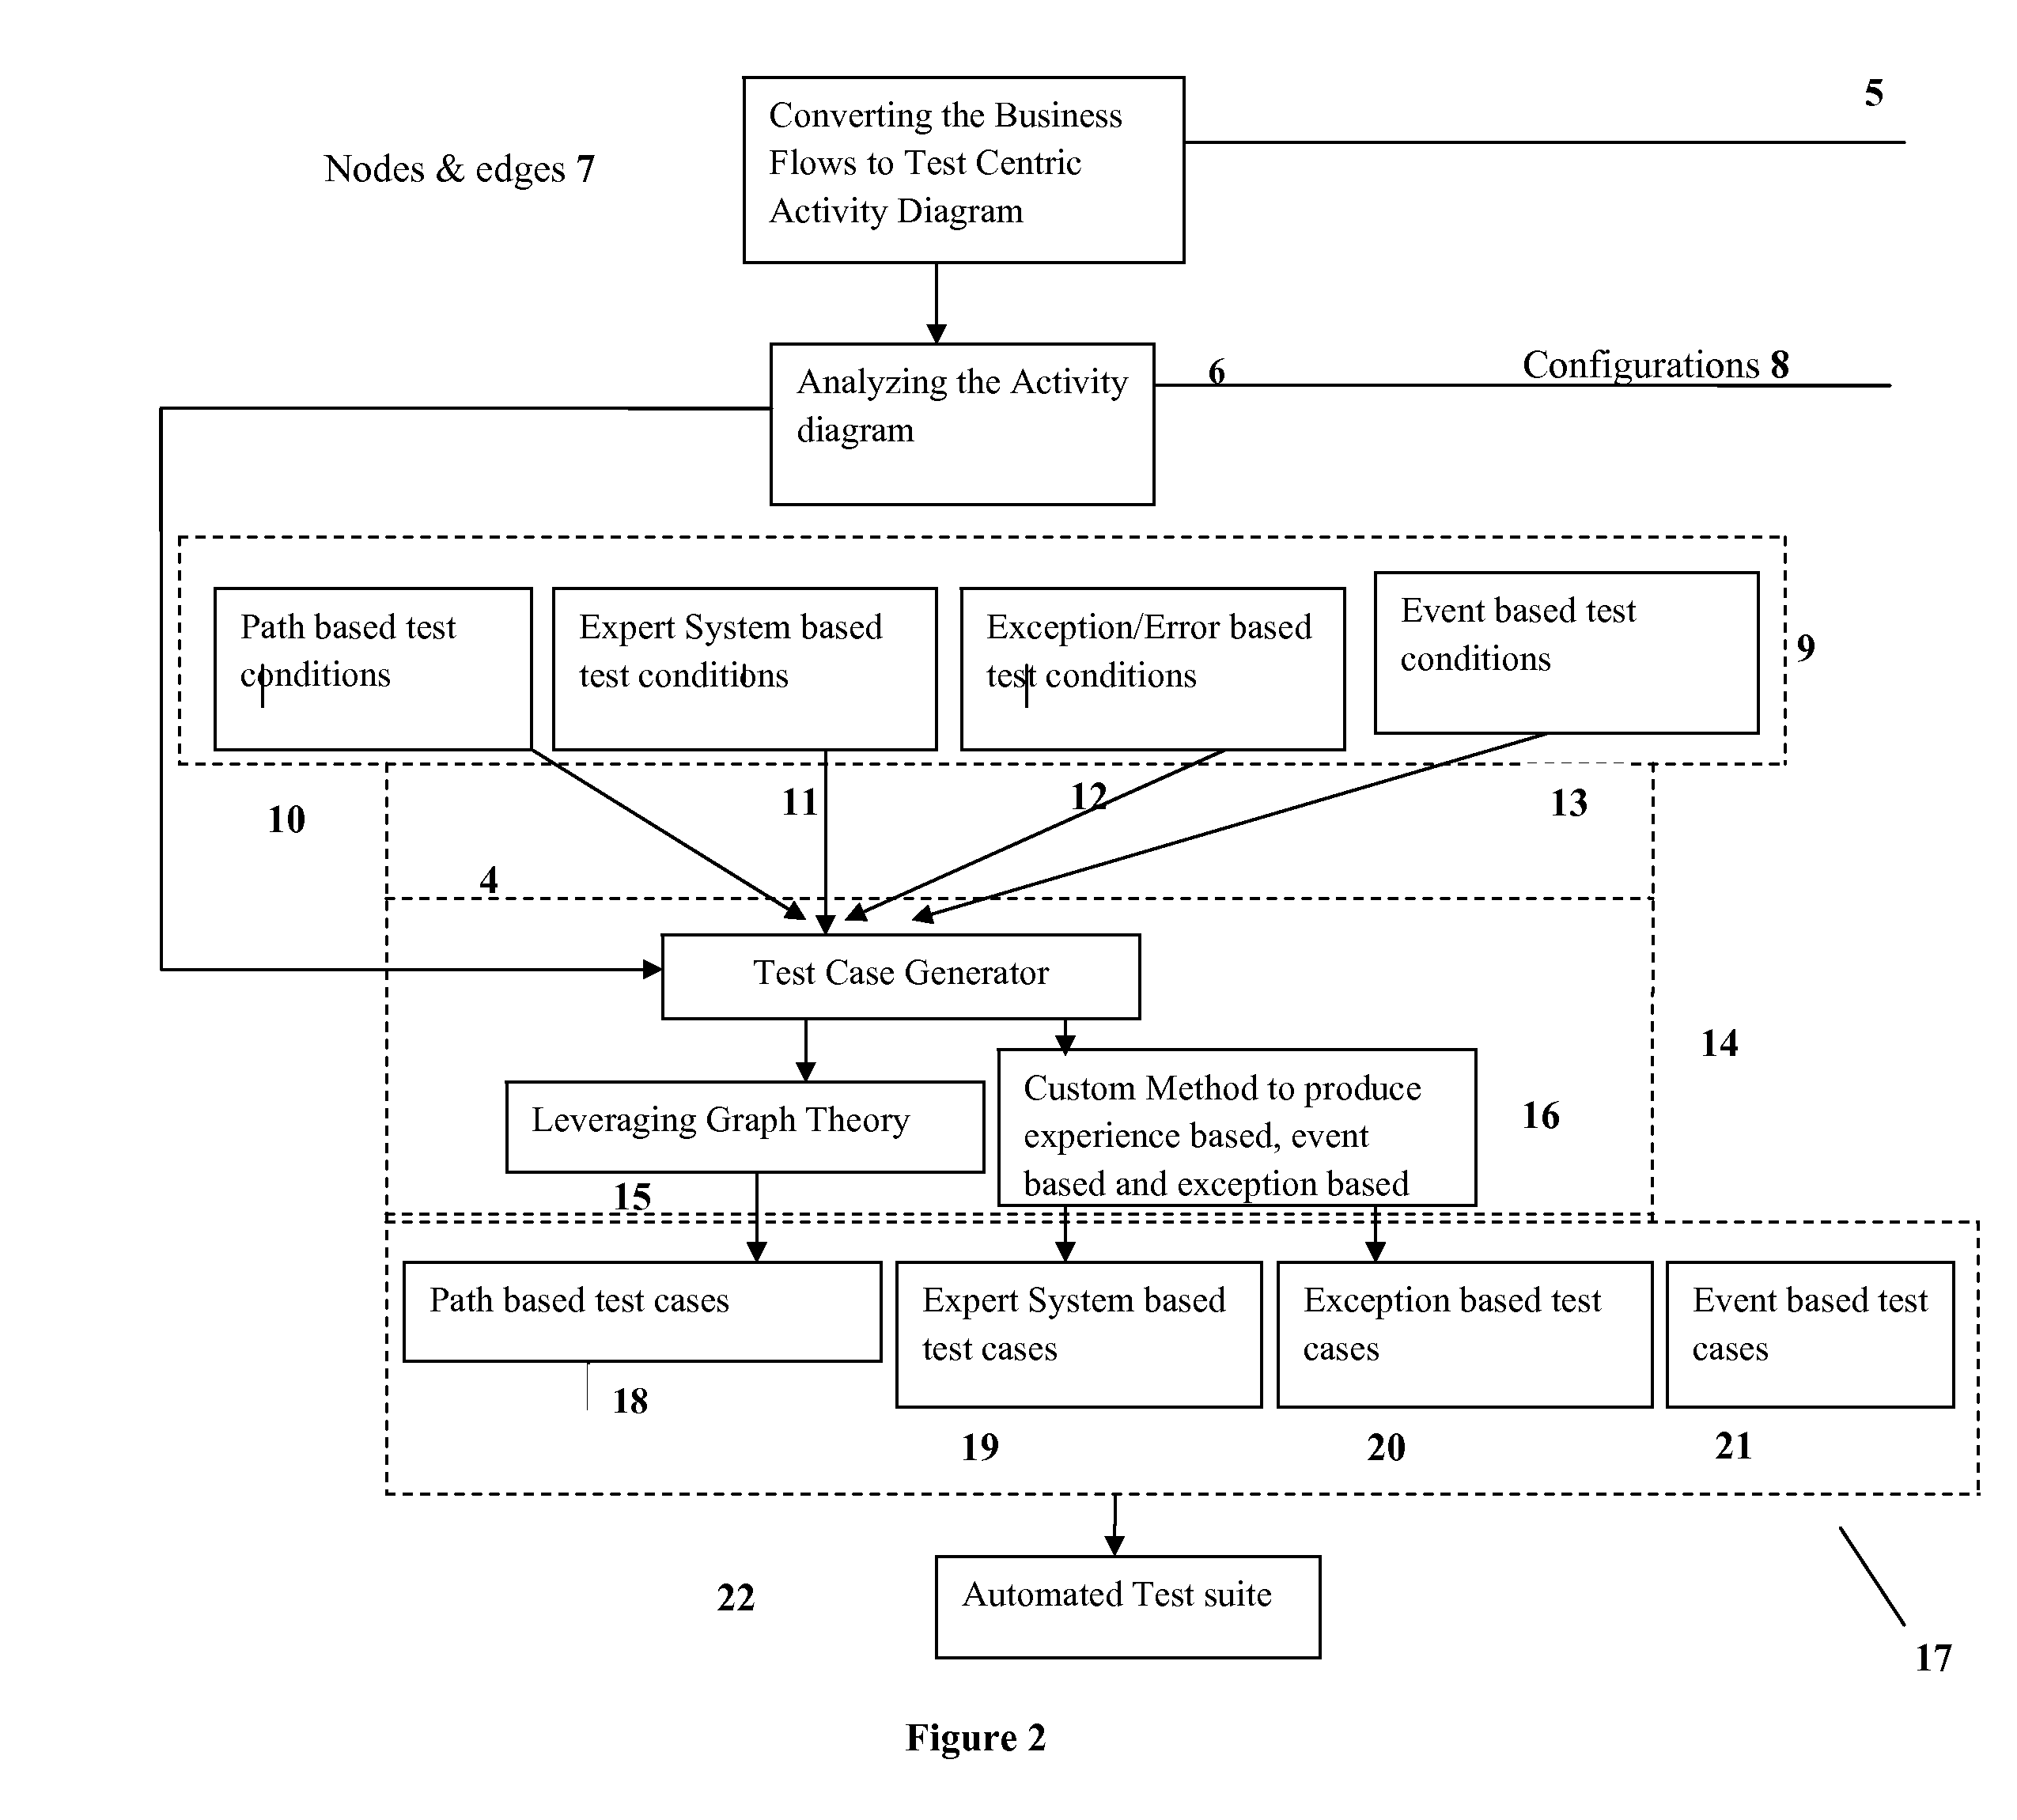 System and method for converting the business processes to test-centric activity diagrams